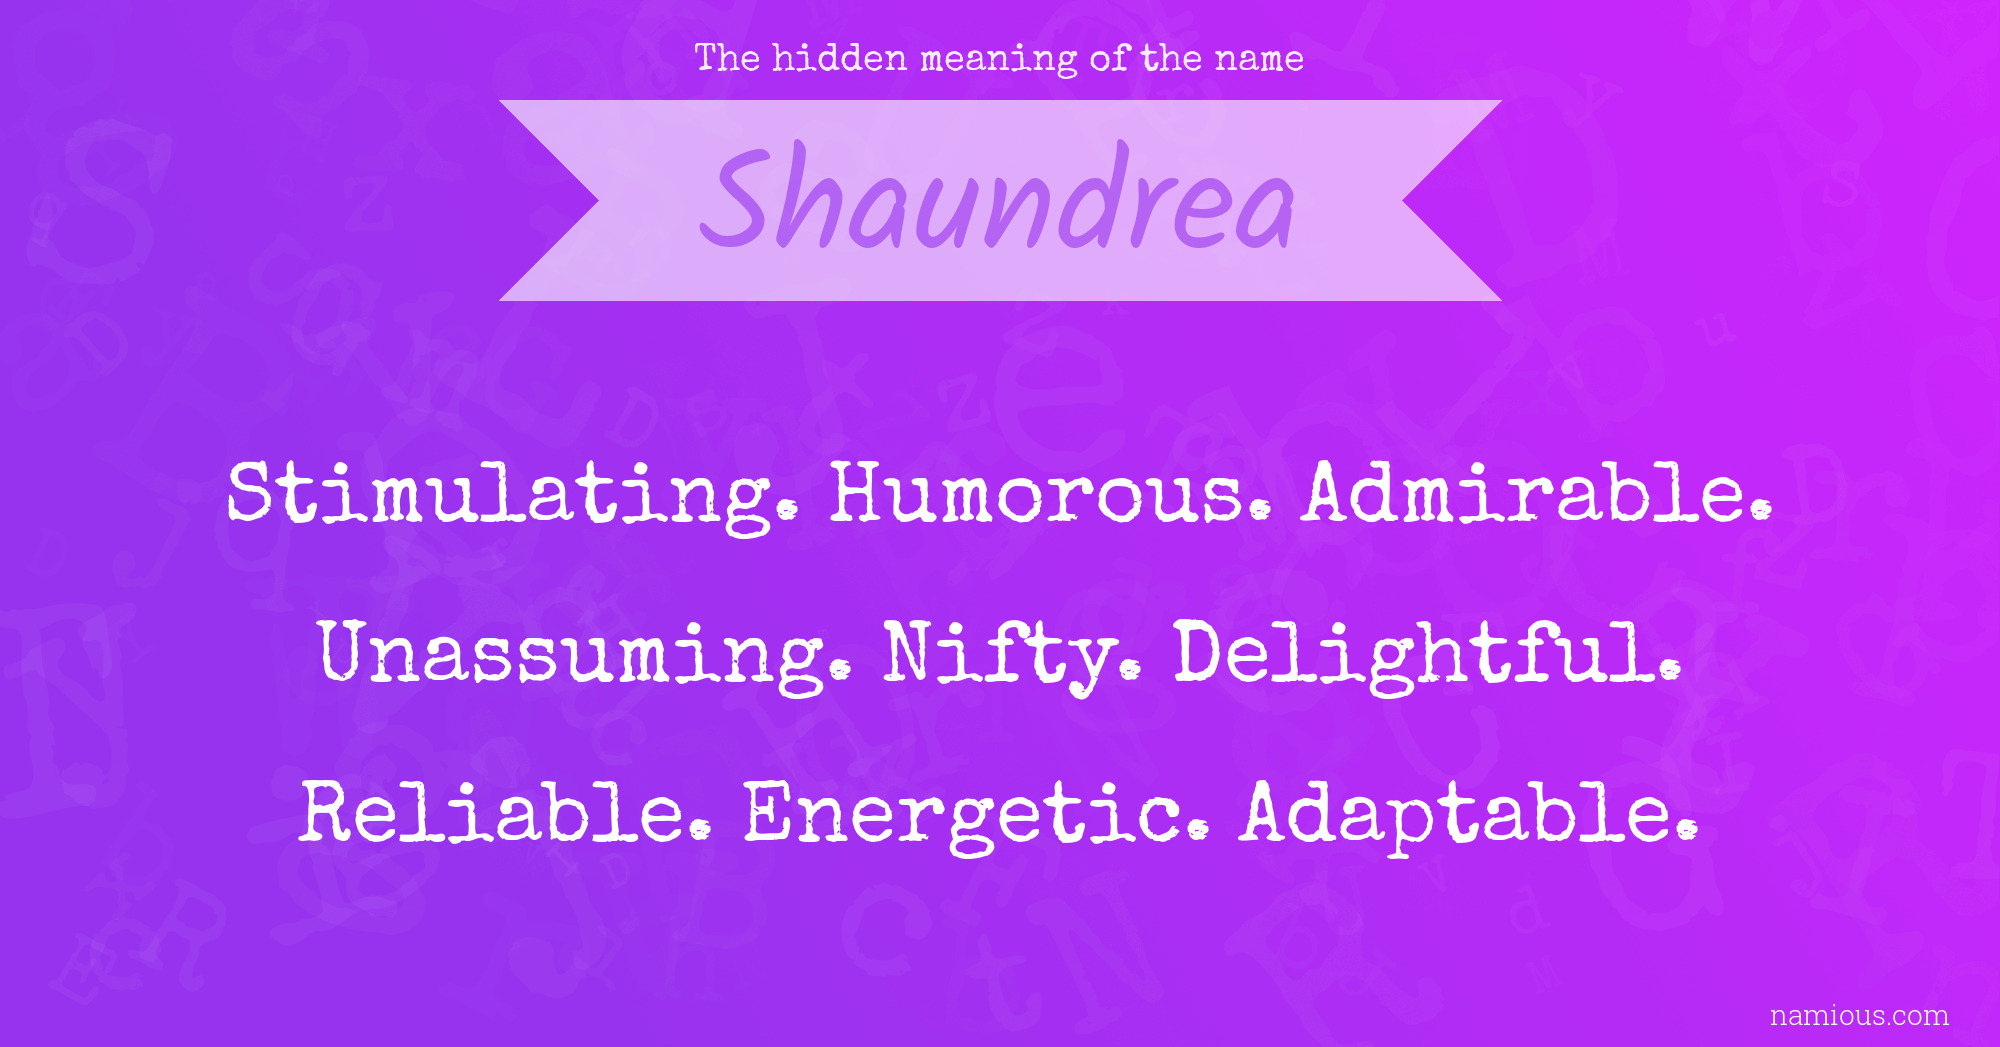 The hidden meaning of the name Shaundrea